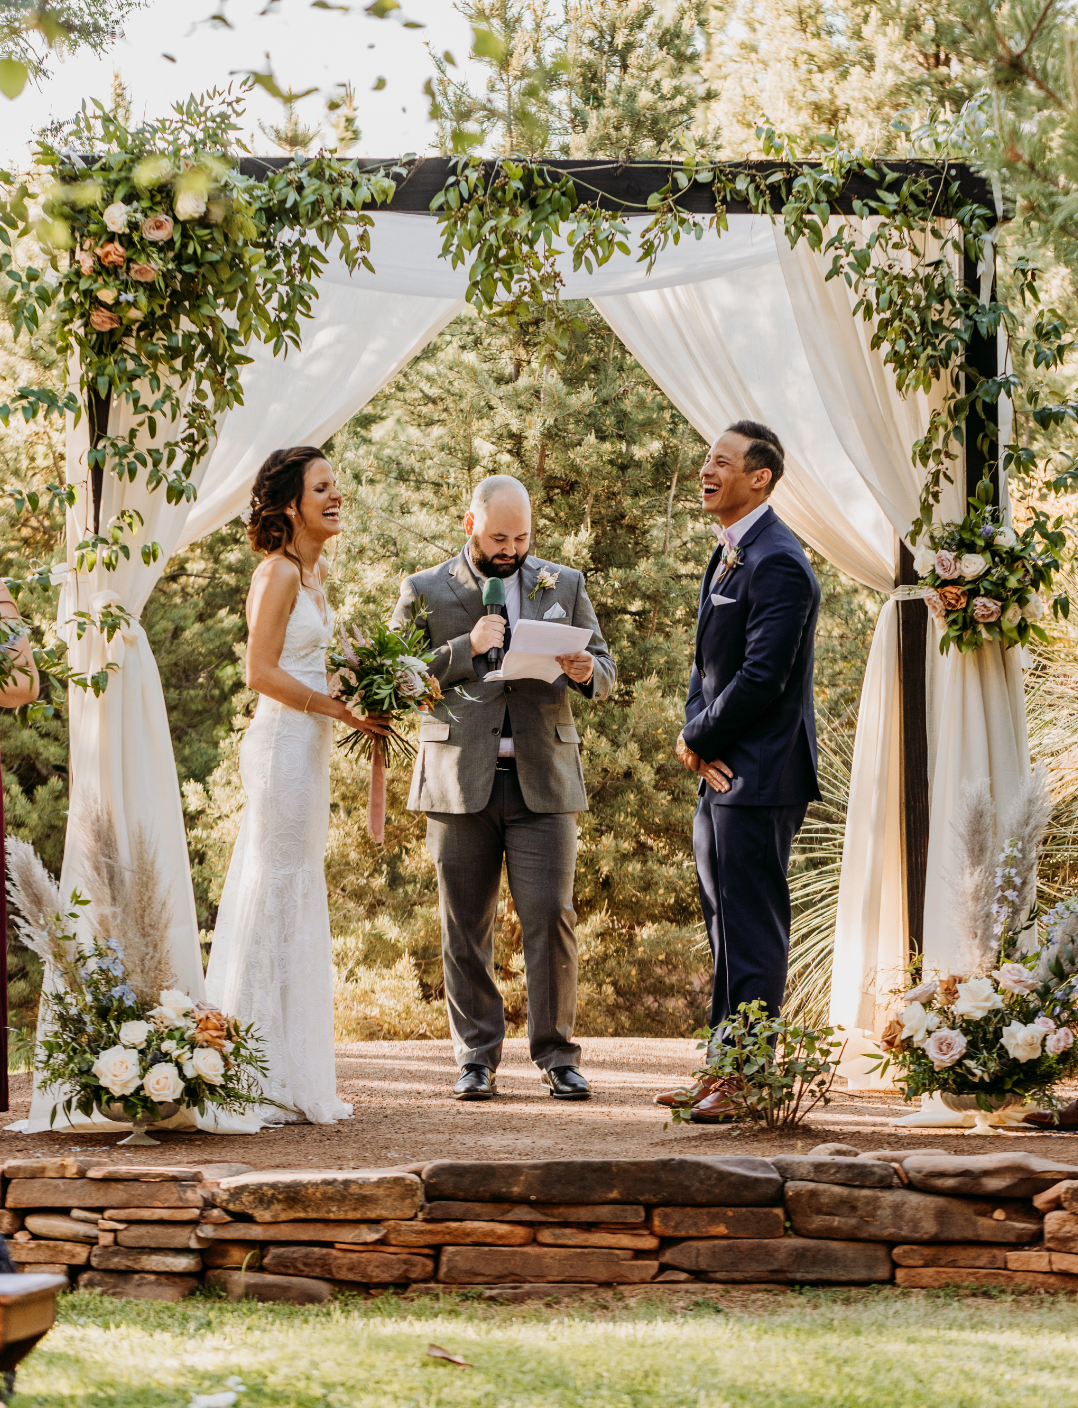 Bride and groom under a ceremony arch of smilax and flowers at their desert wedding